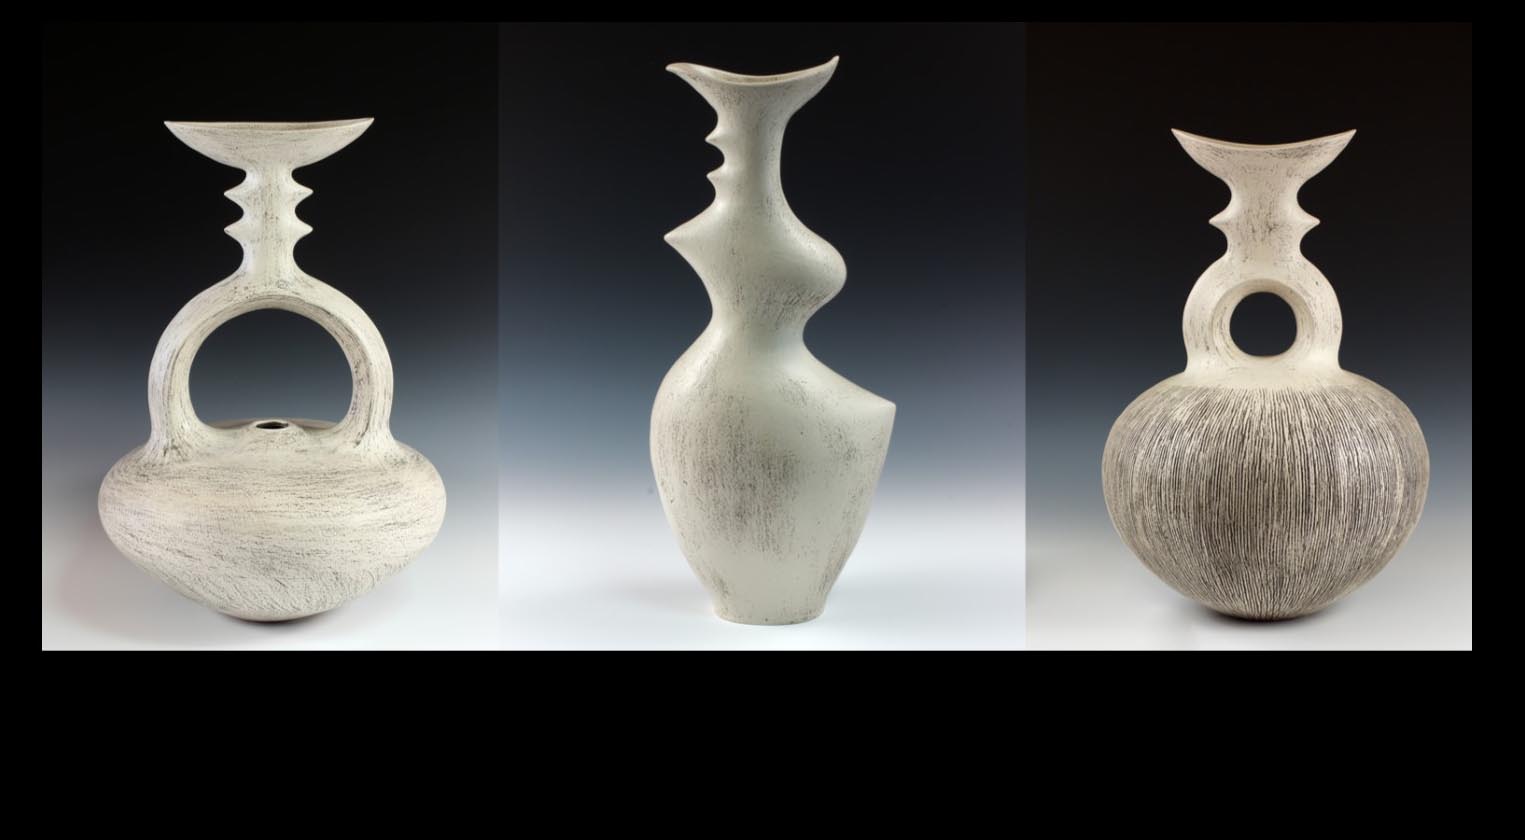 "Sculptural Vessels" by Sharon Brush